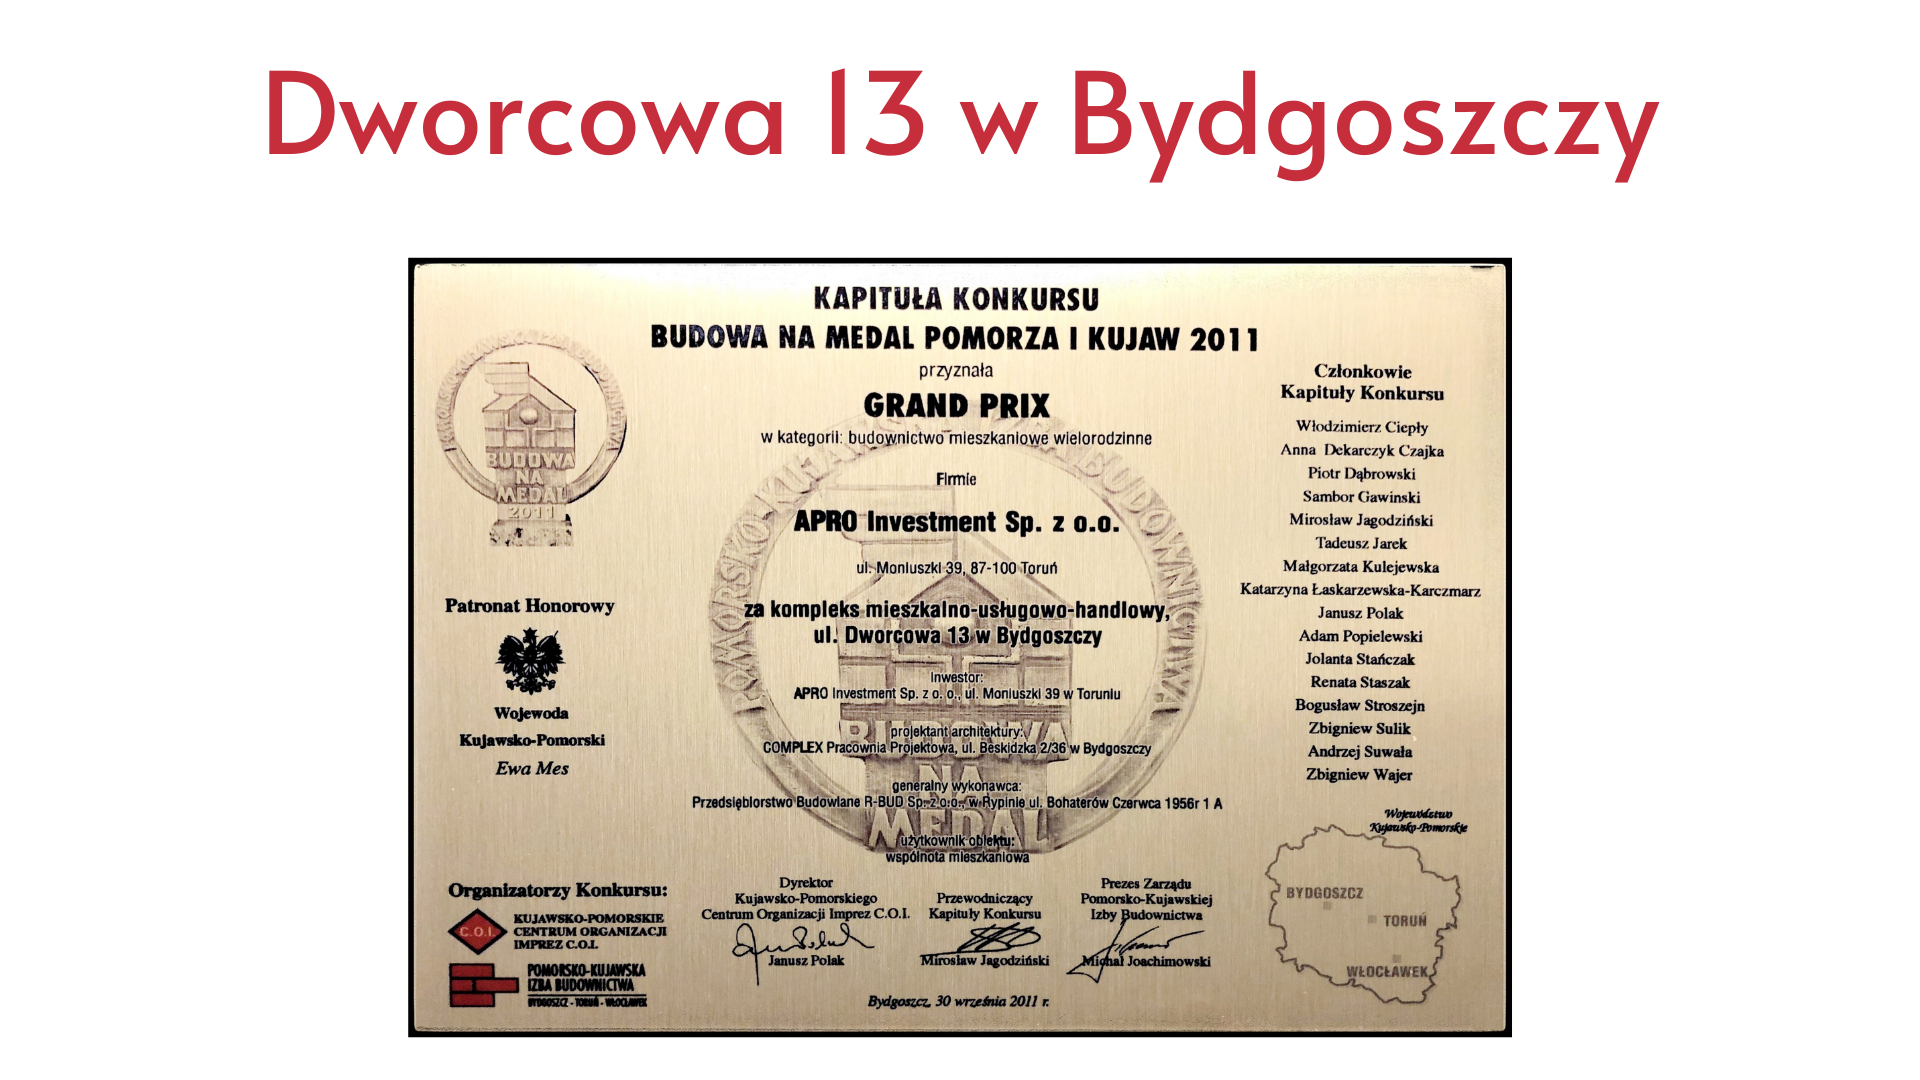 Dworcowa 13 Apro Investment